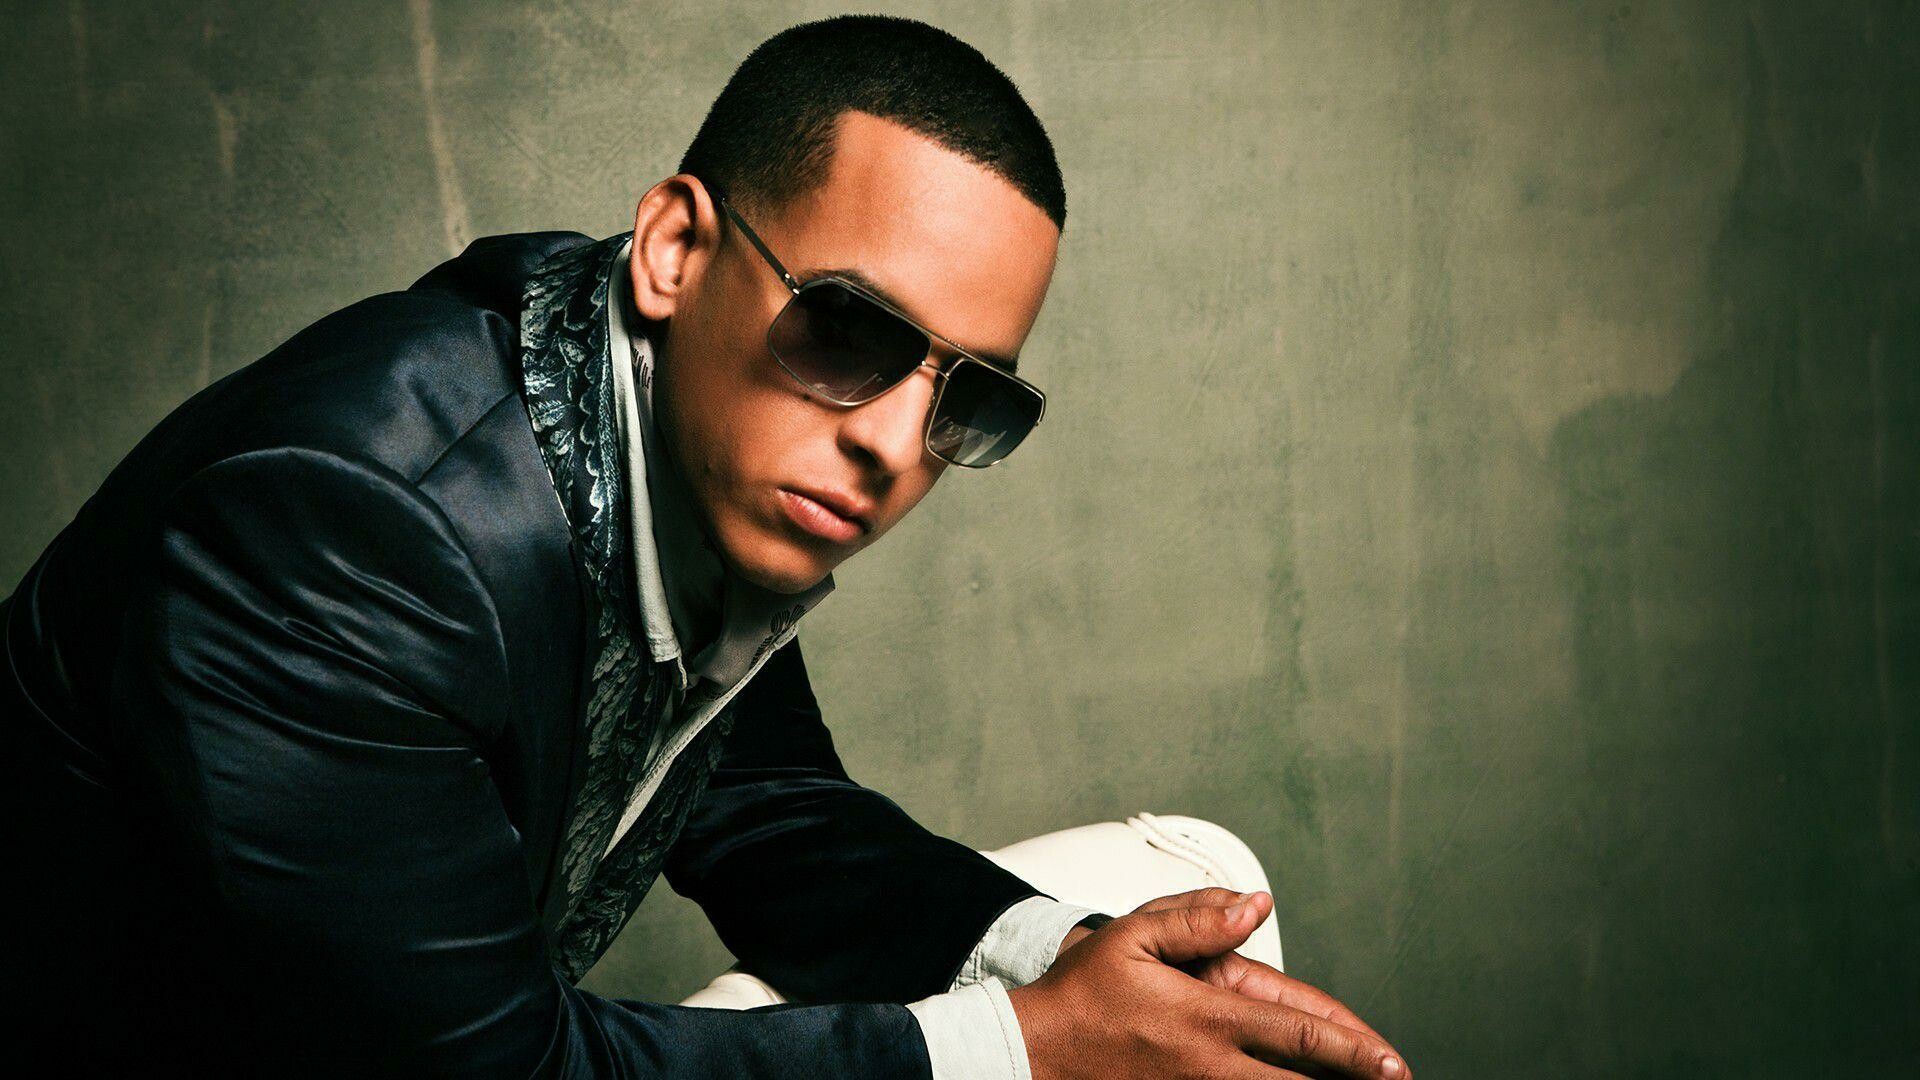 Daddy Yankee: Released the hit single "Despacito" in 2017, in collaboration with Latin pop singer Luis Fonsi. 1920x1080 Full HD Wallpaper.